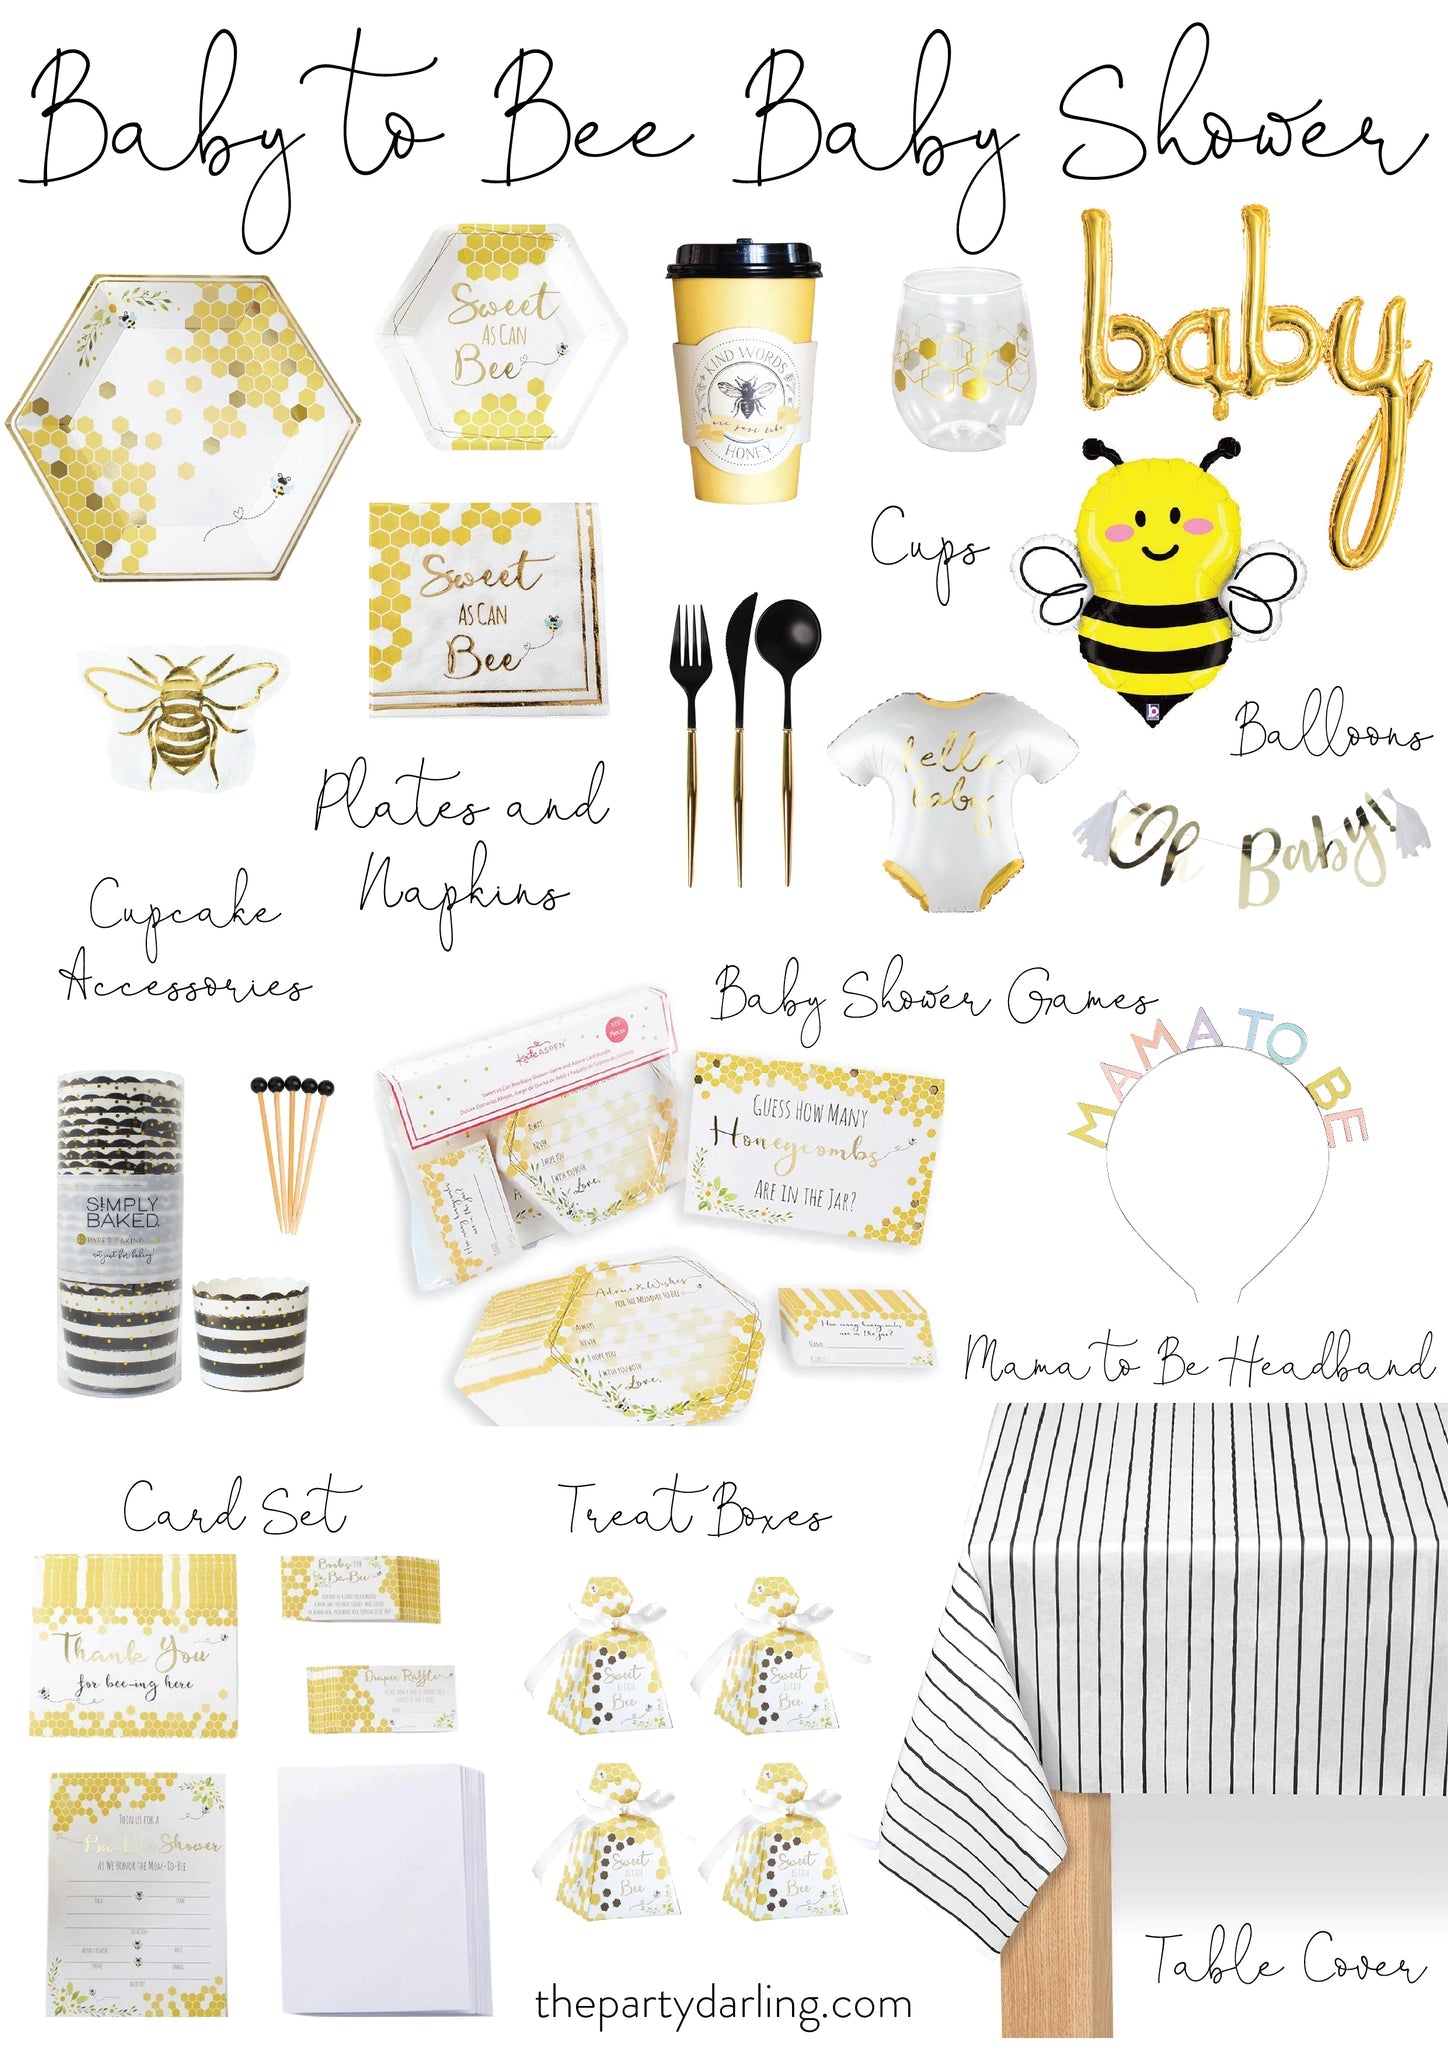 34" Smiling Bumble Bee Balloon | The Party Darling